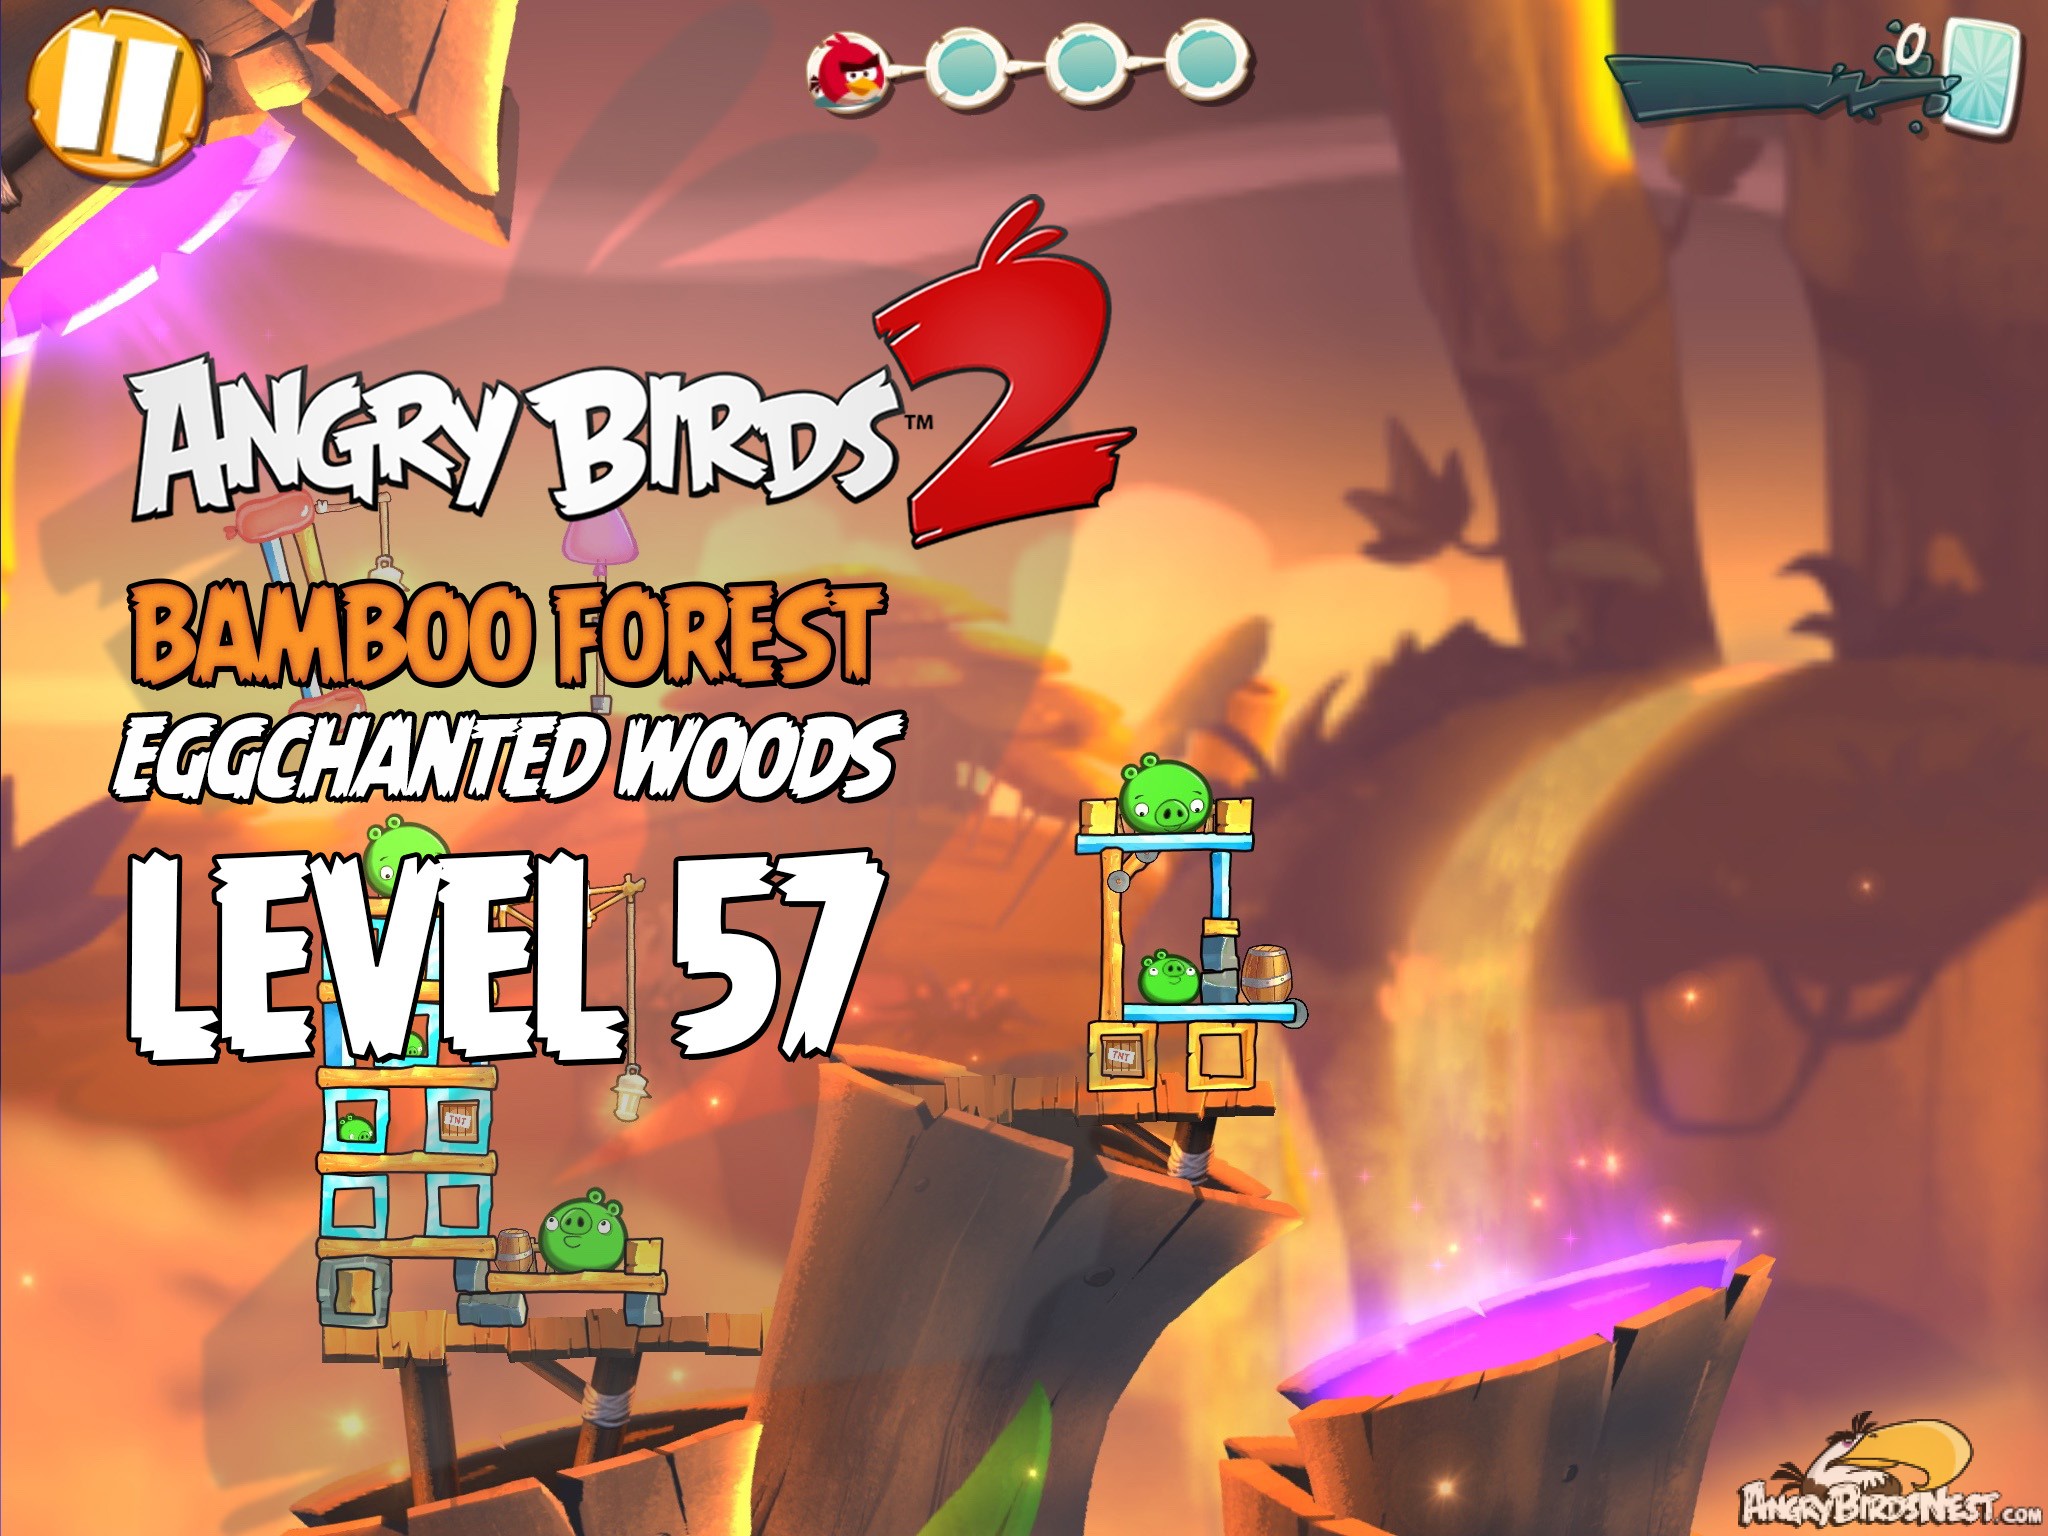 Angry Birds 2 Bamboo Forest Eggchanted Woods Level 57